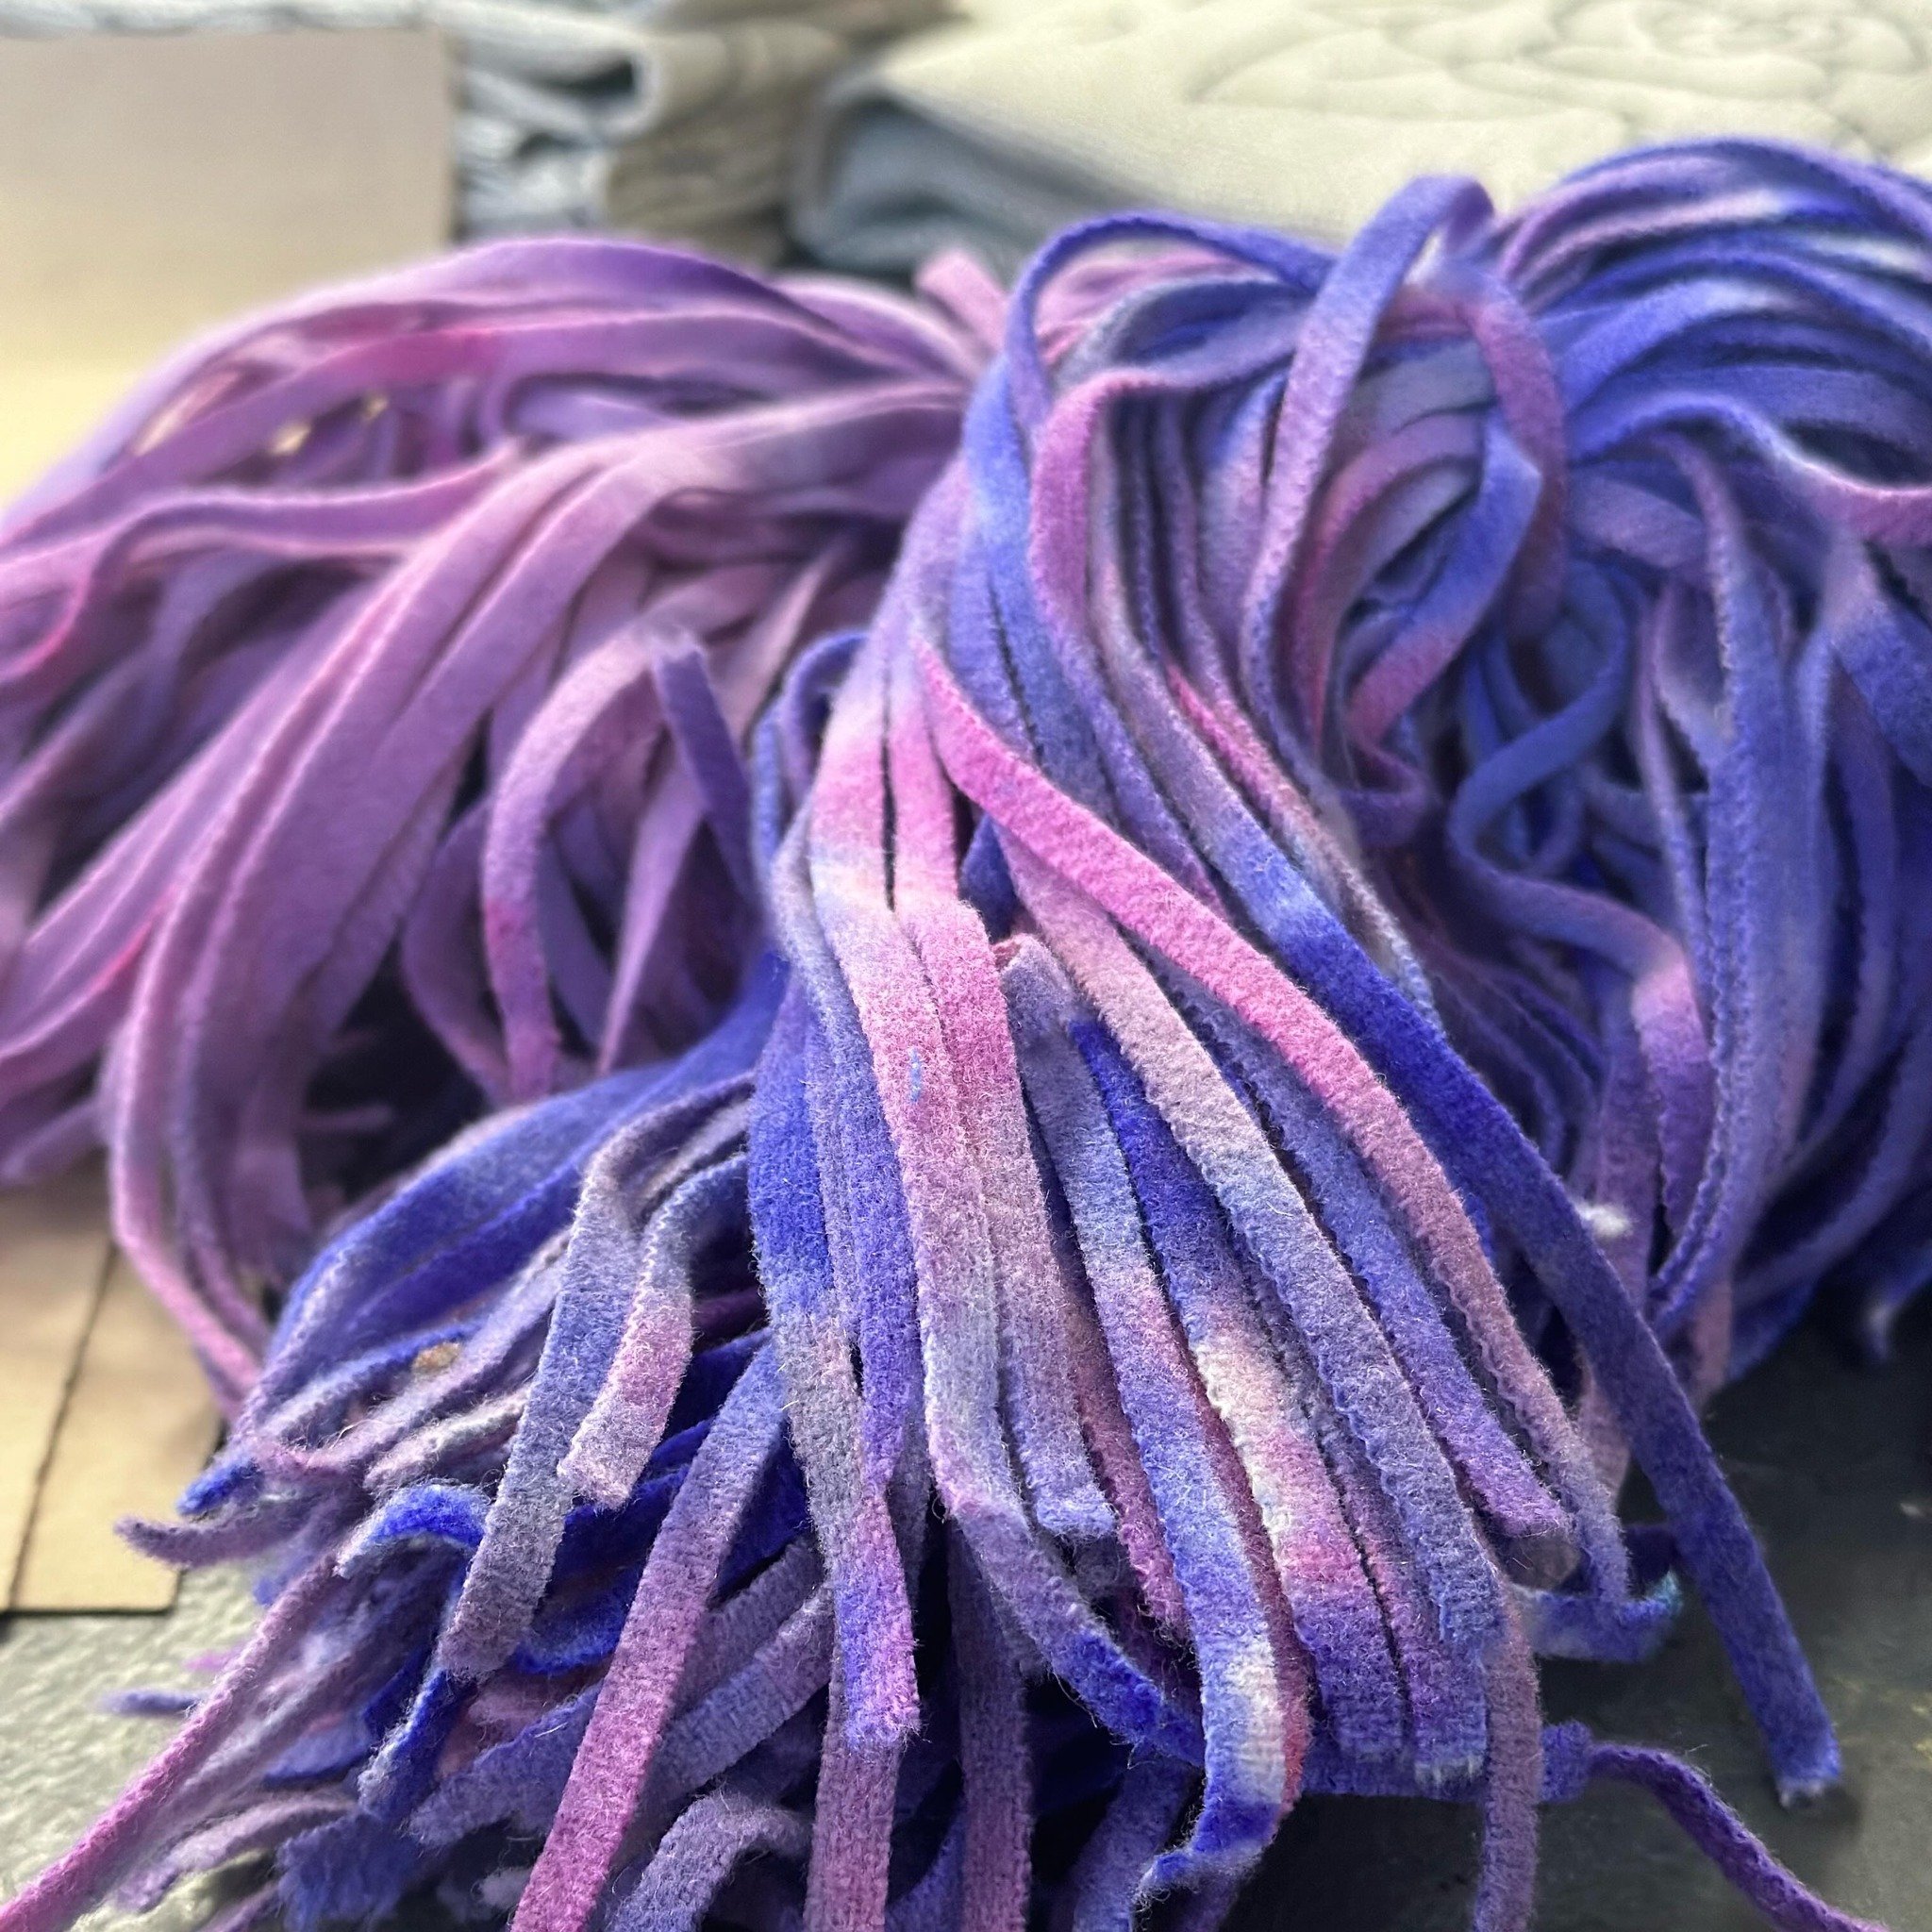 Two beautiful purples going out to our monthly wool club members for May! Comes to you as pieces or cut into strips! #rughooking #wool #rugmaking #woolofthemonth #rughookersofinstagram #craftsupplies #handyed #handdyedwool #aciddyes